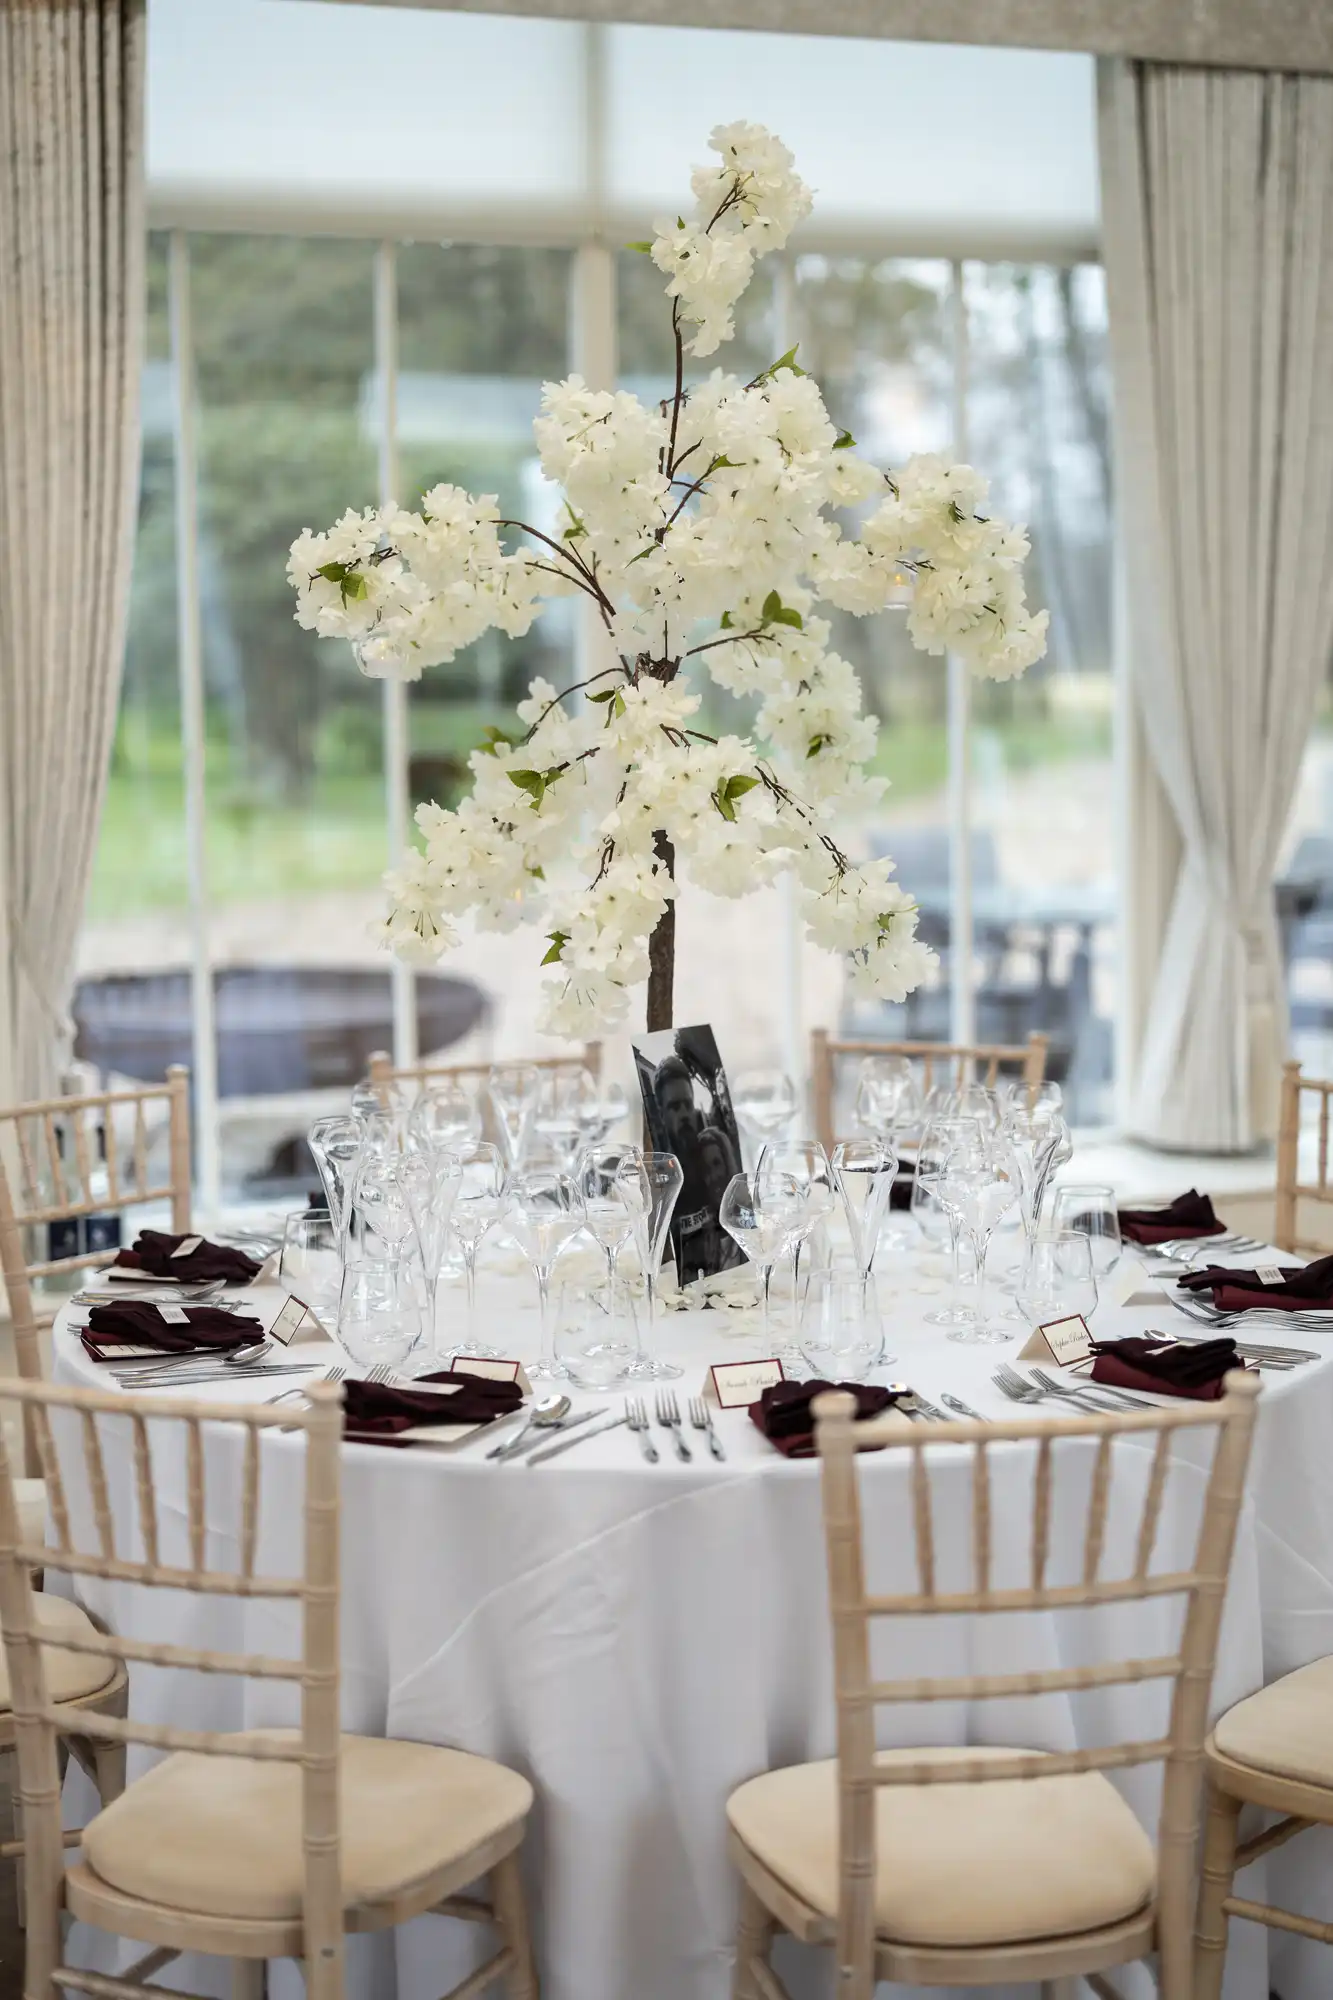 Elegant wedding table setup featuring white floral centerpiece, crystal glassware, and burgundy napkins in a venue with large windows and curtains.